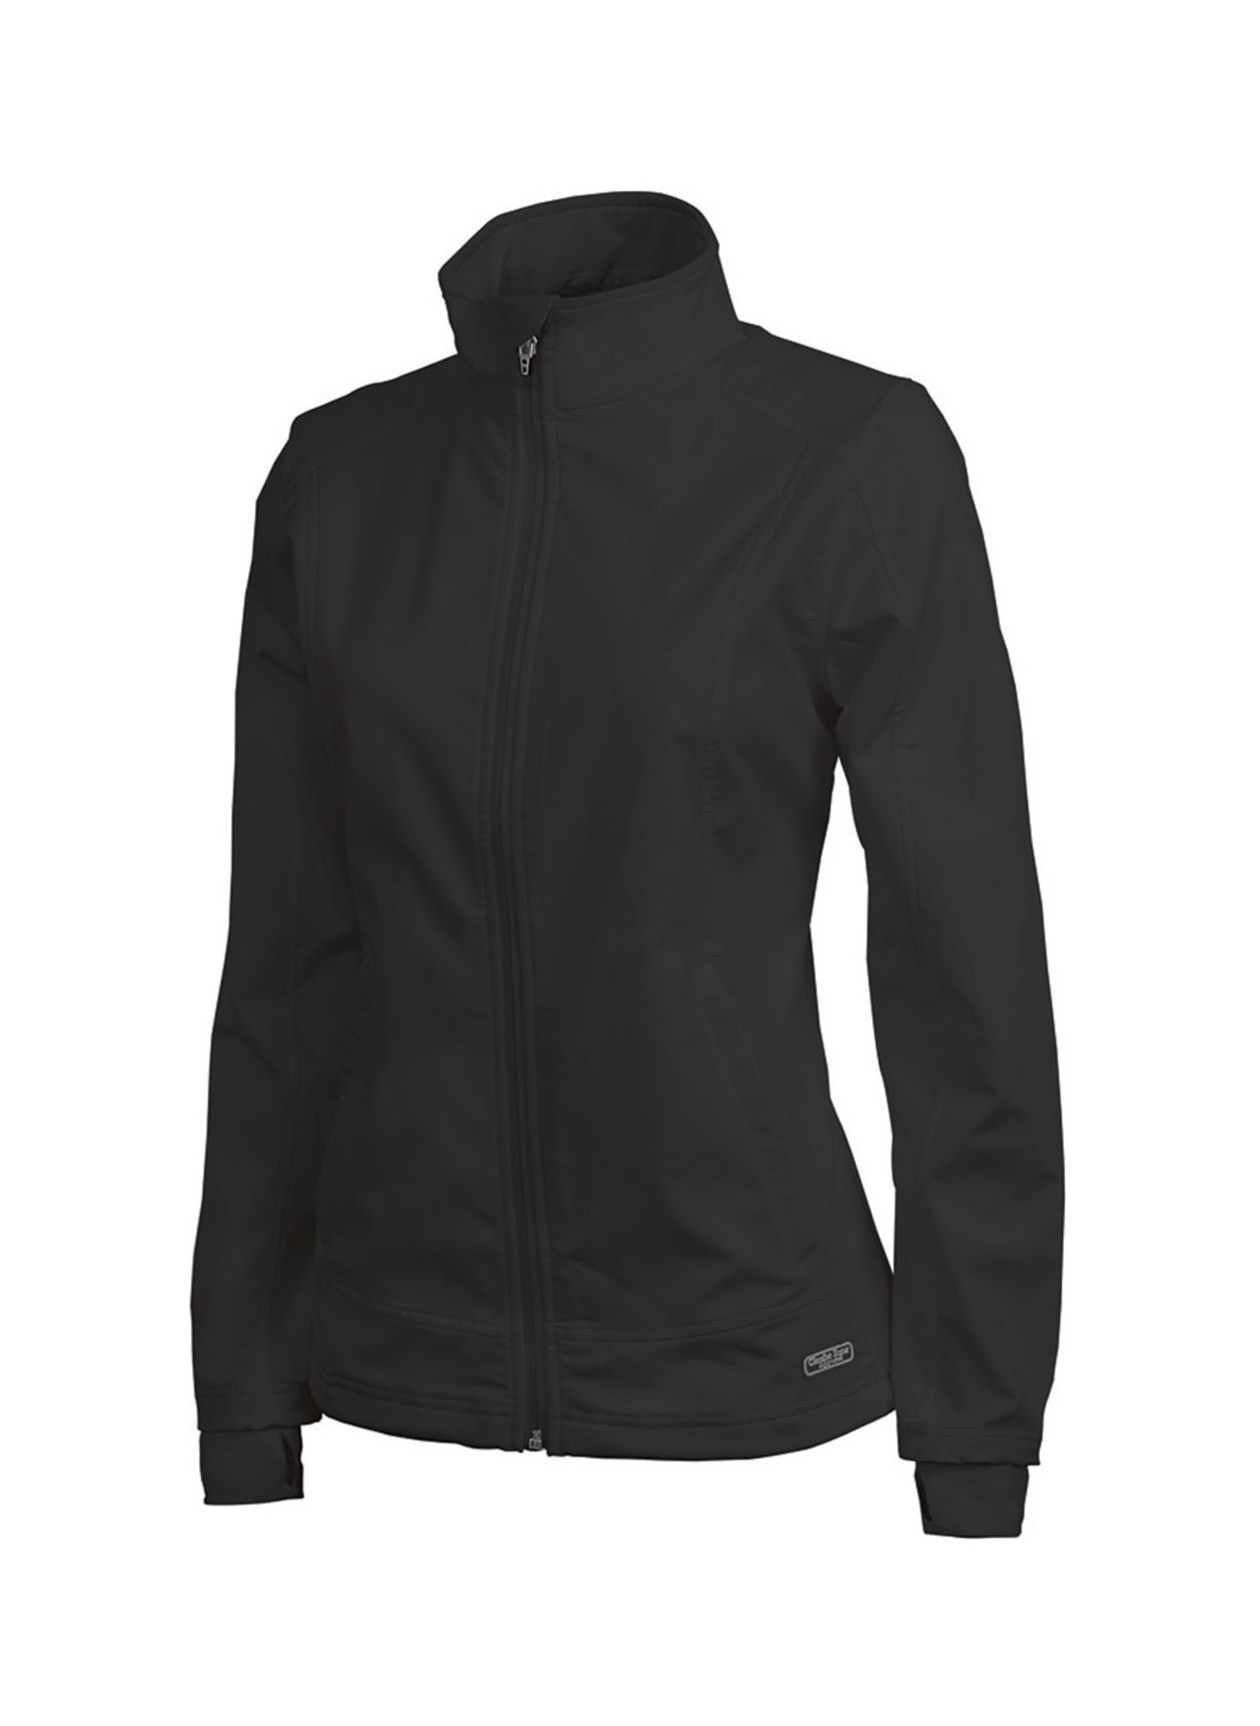 Charles River Women's Black Axis Soft Shell Jacket